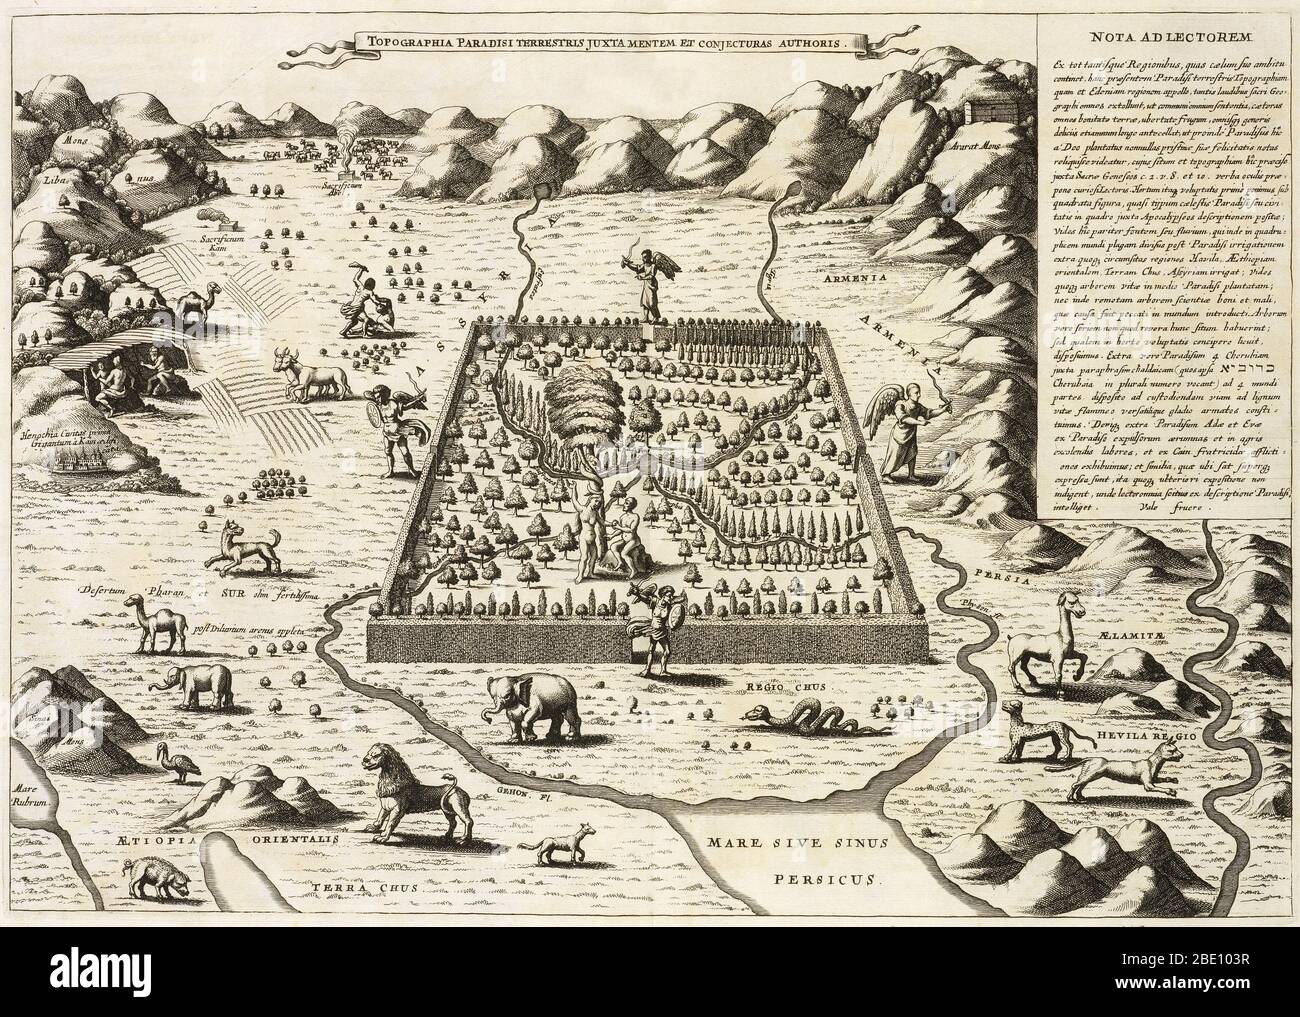 A depiction of the Garden of Eden and "topography of the earthly paradise" by Athanasius Kircher (1602-1680), from 1675. Adam and Eve can be seen inside the walls, with angels at all four gates. Cain can be seen killing Abel at upper left outside the walls. Athanasius Kircher was a 17th-century German Jesuit scholar and polymath who published around 40 major works, most notably in the fields of "Oriental studies," geology, and medicine. Stock Photo